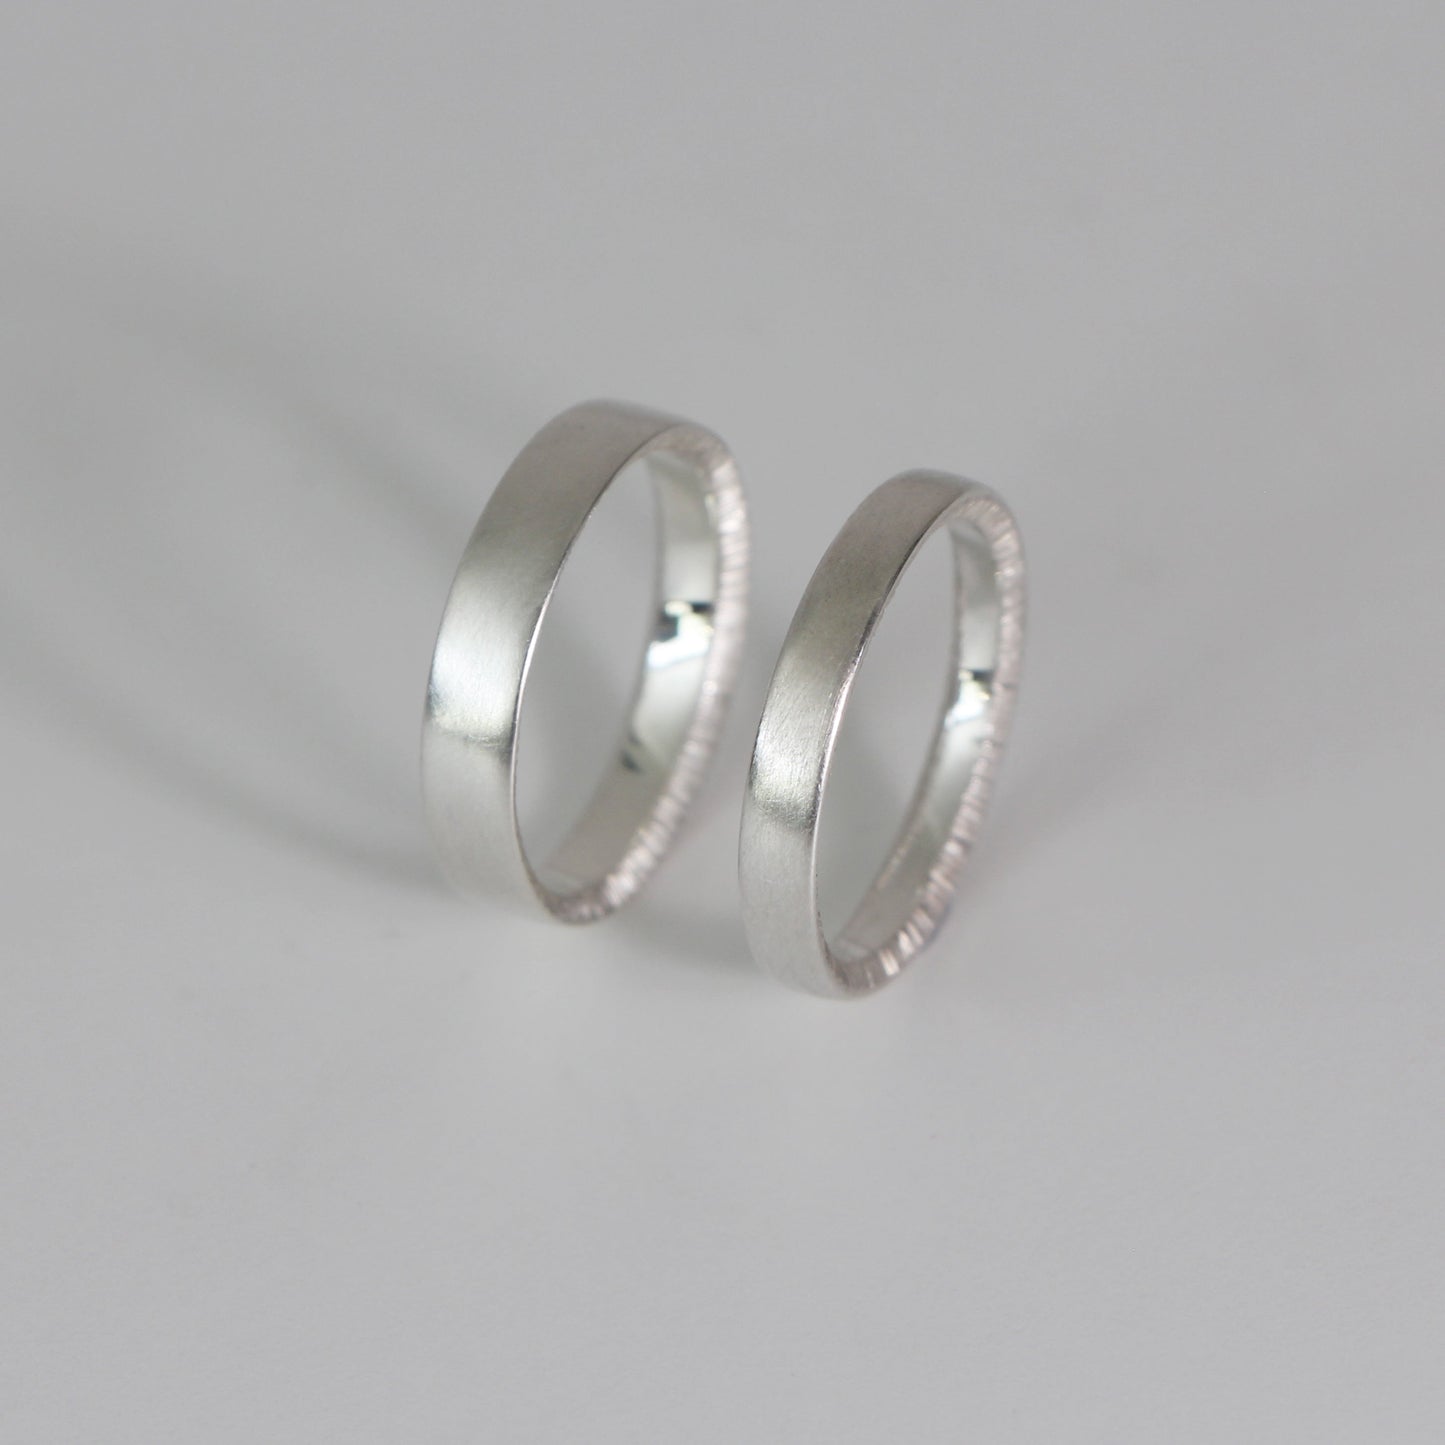 Sunshine Hammered Texture Band - Silver Brushed, 5mm and 4mm wide - Aisling Chou Studio